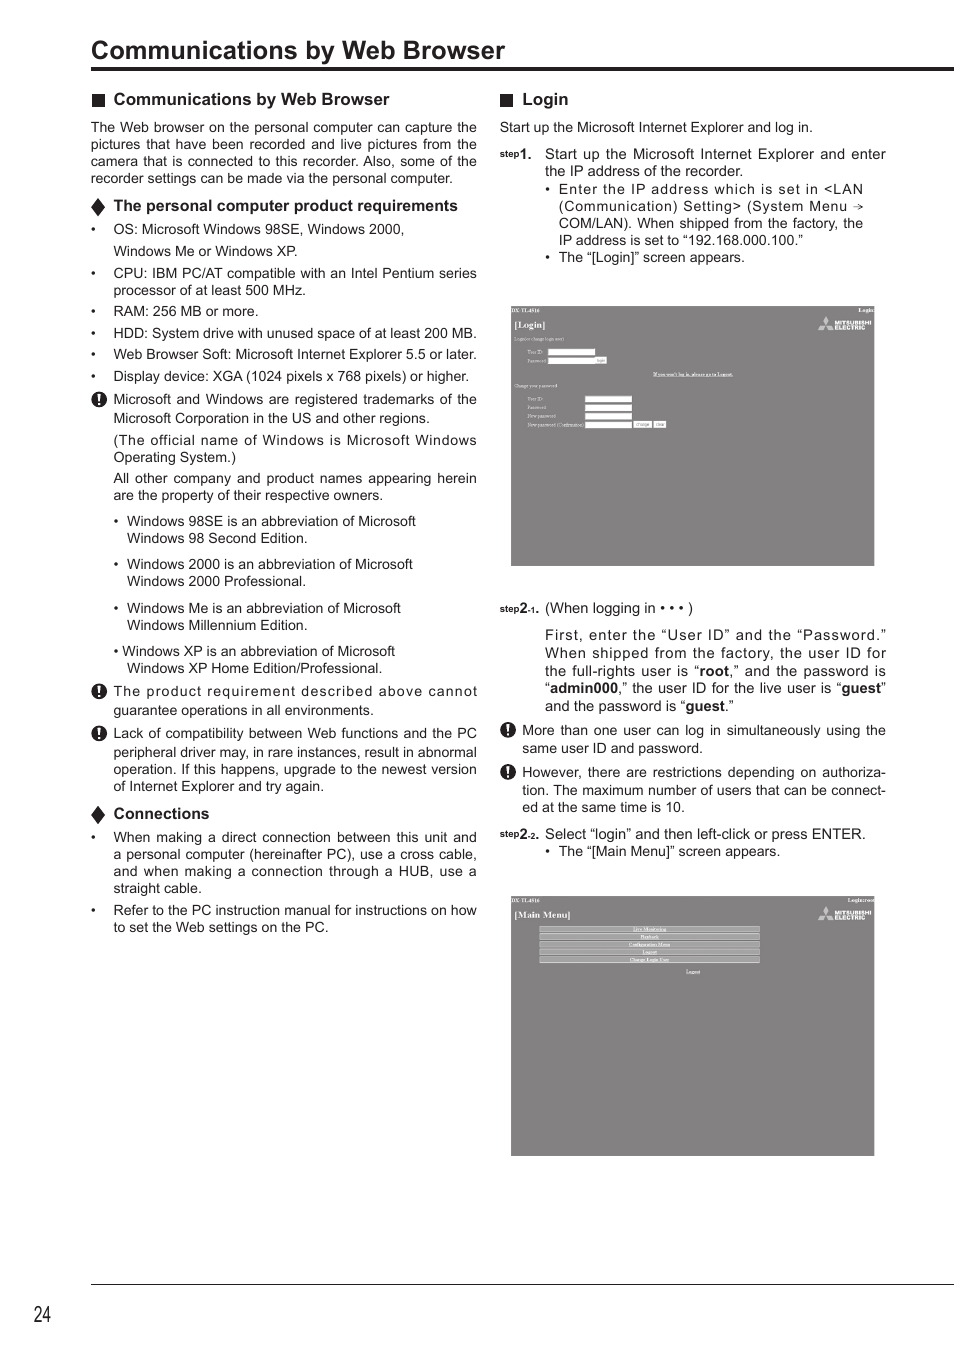 Communications by web browser | Nikon DX-TL4516E User Manual | Page 24 / 37